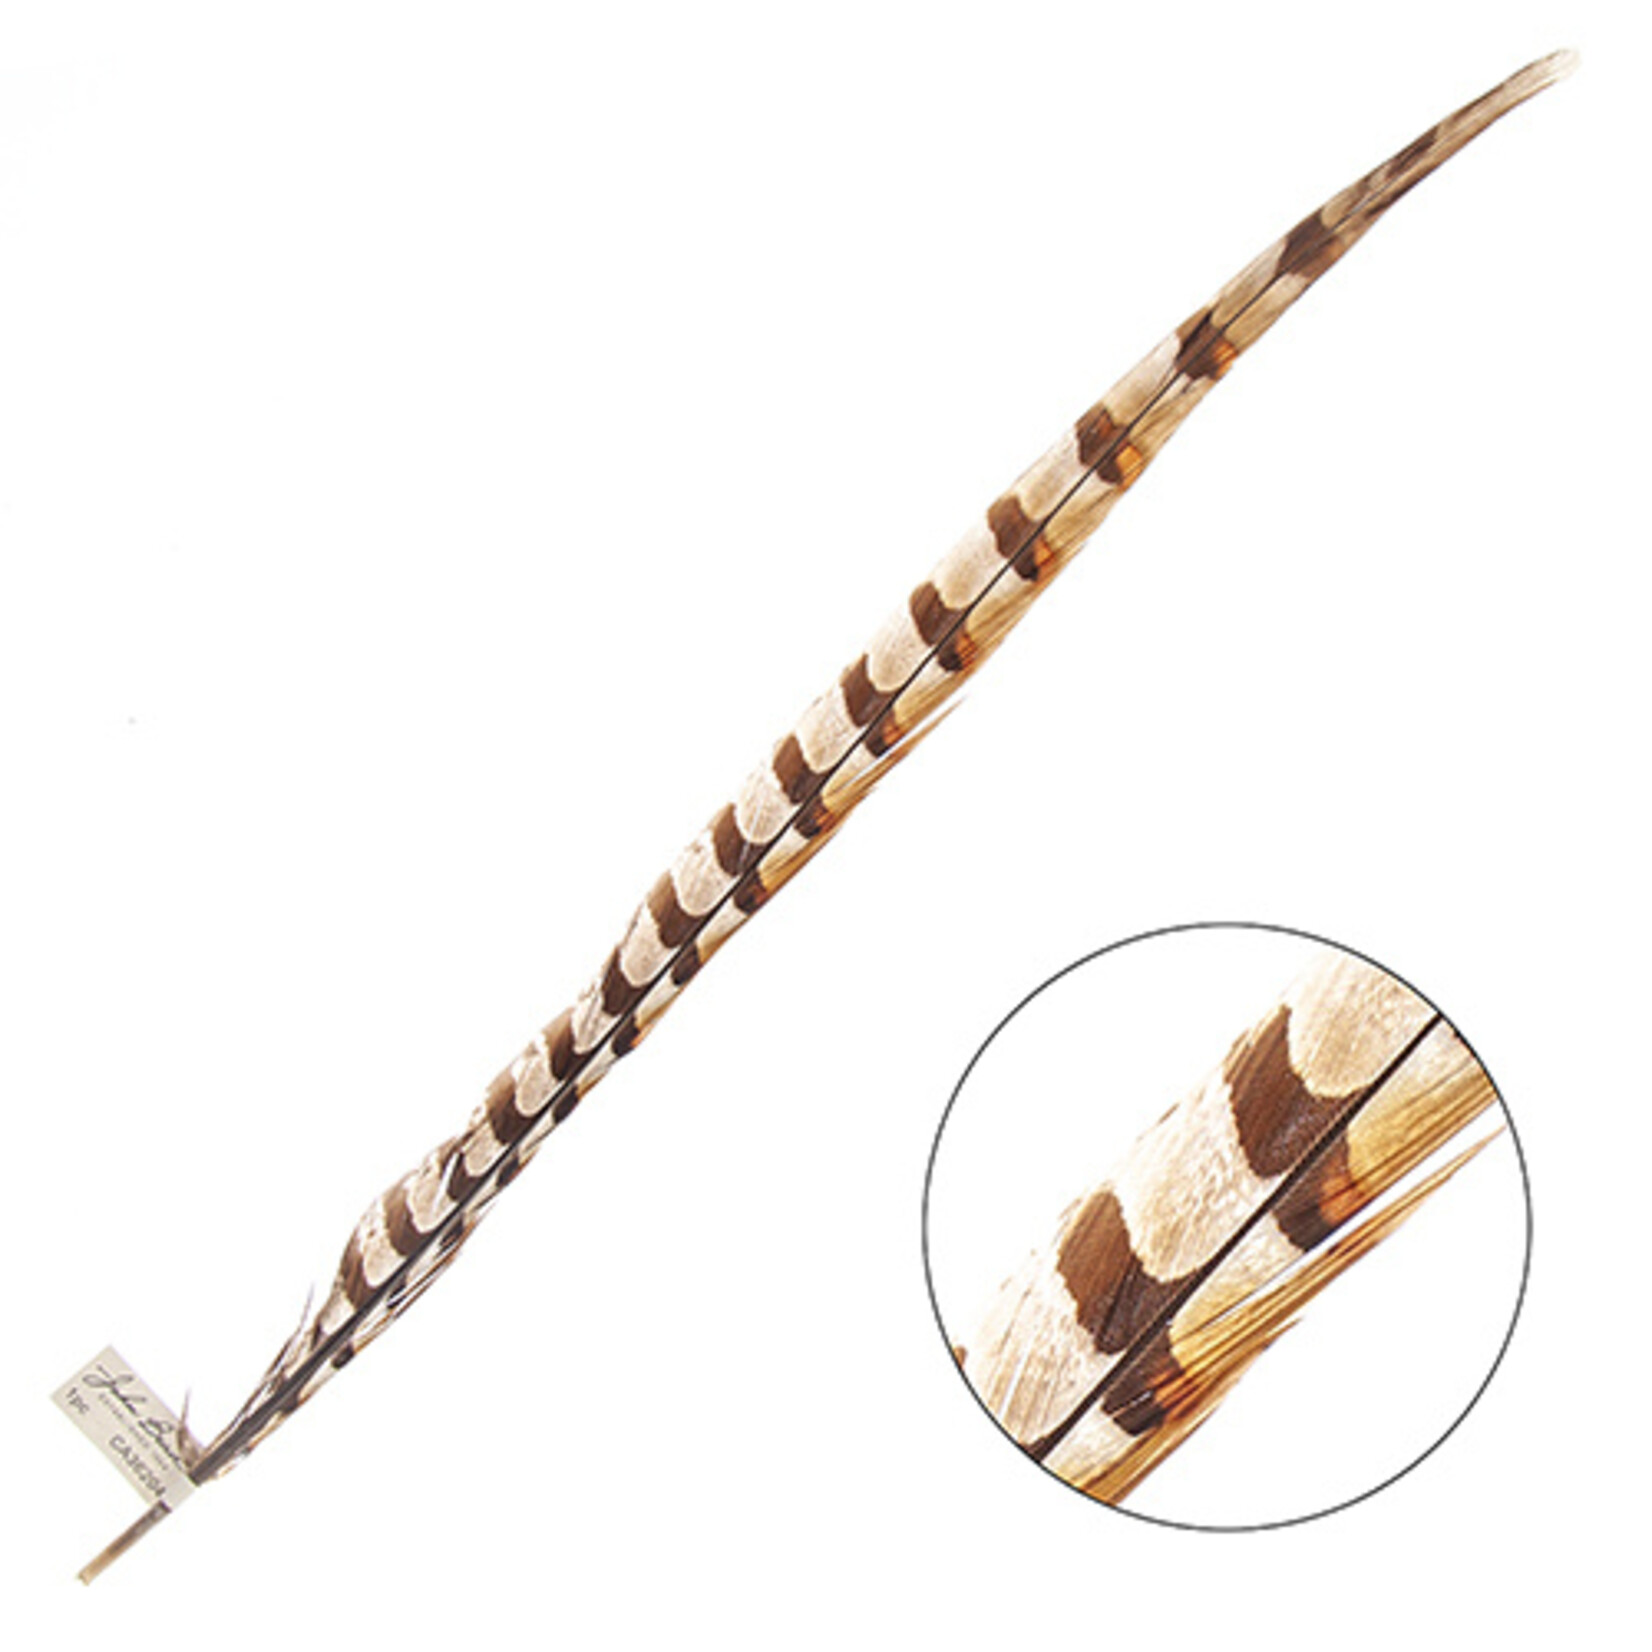 Reeves Pheasant Tail Natural 20 - 25 Inch